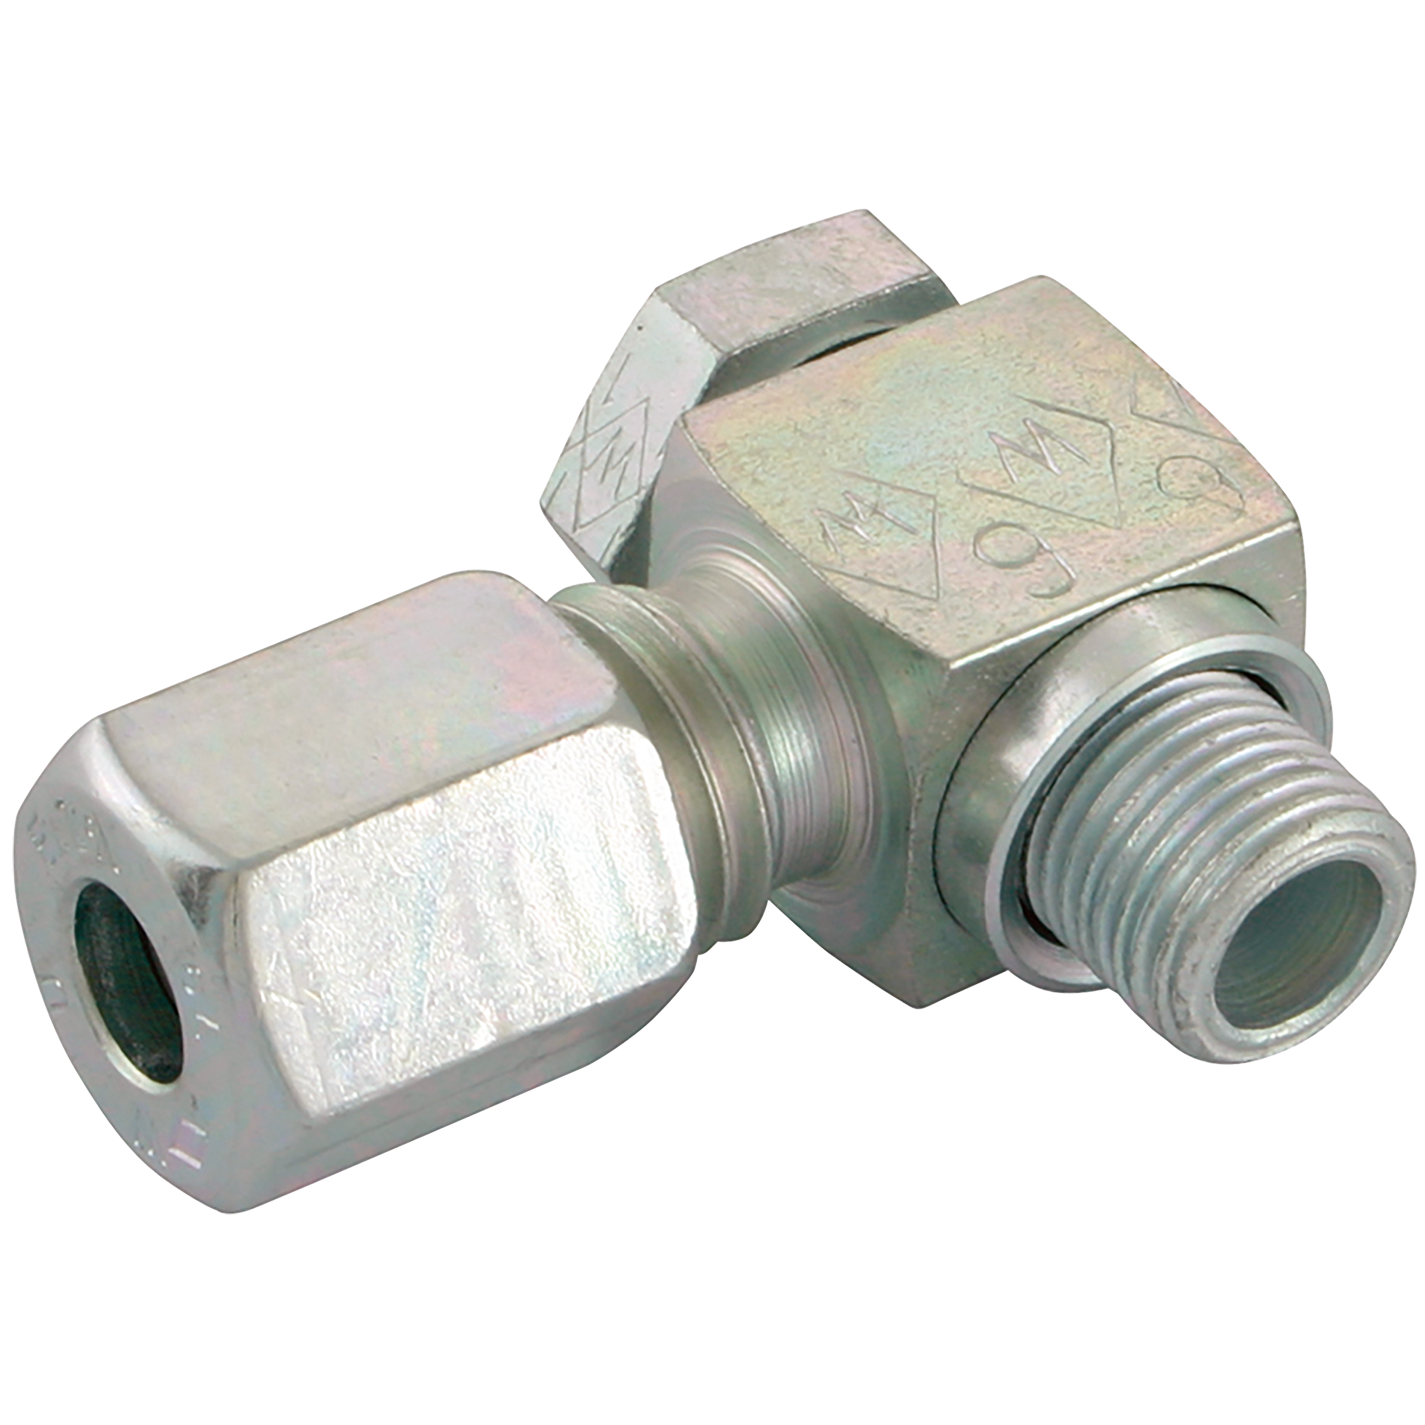 UK Suppliers of Hydraulic Connectors